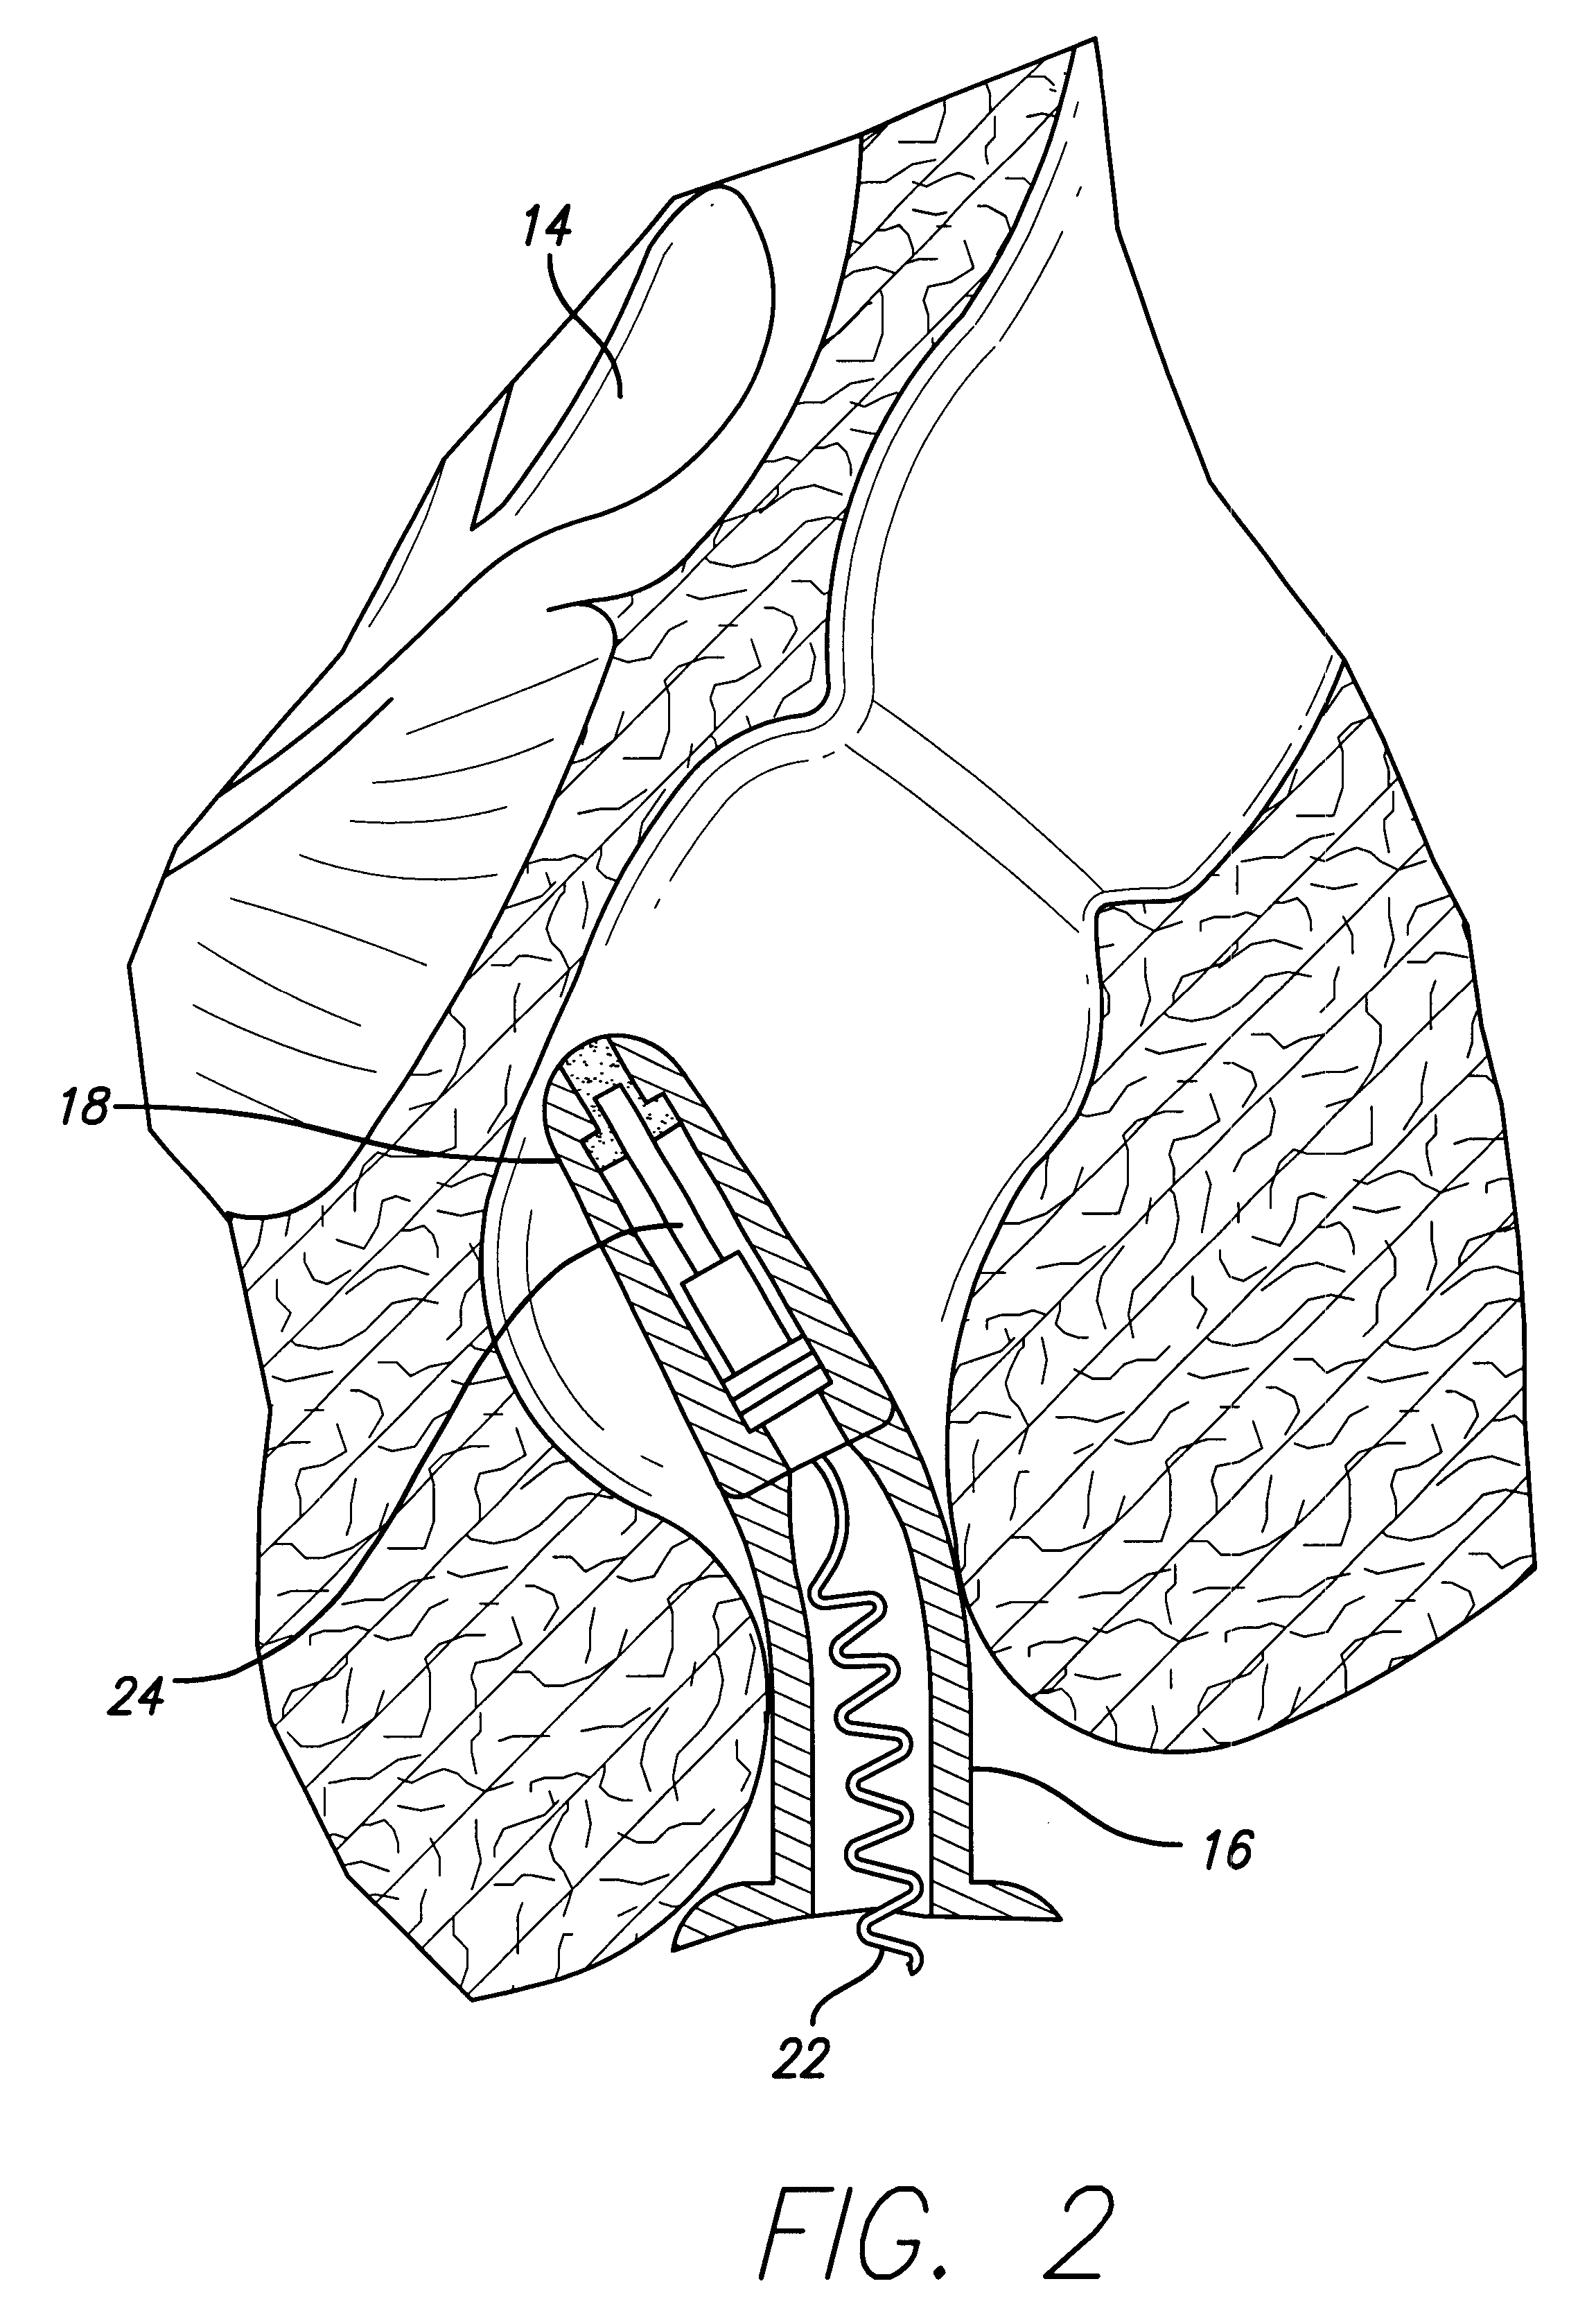 Ultrasound system for disease detection and patient treatment